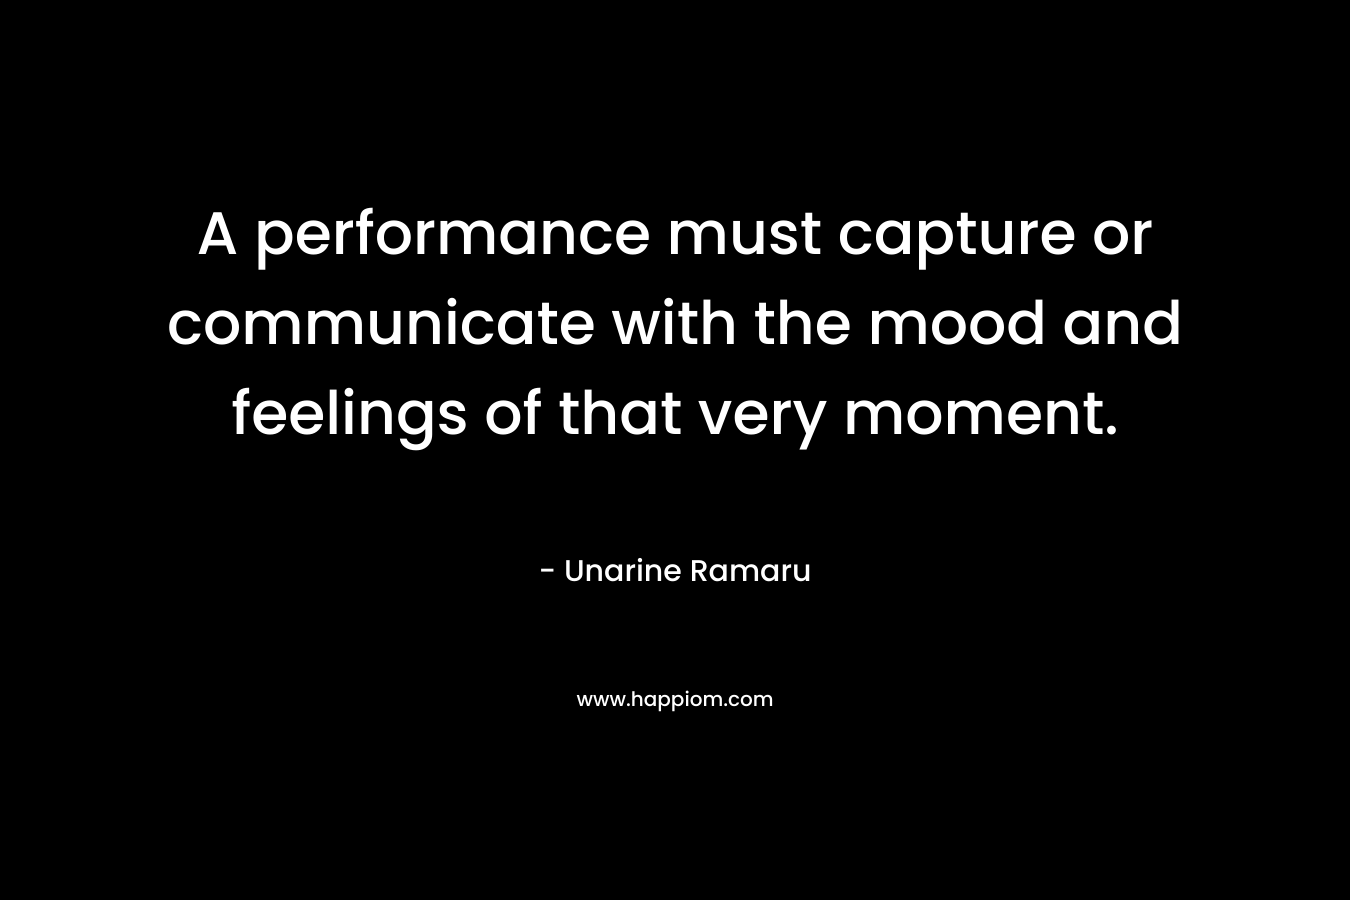 A performance must capture or communicate with the mood and feelings of that very moment.